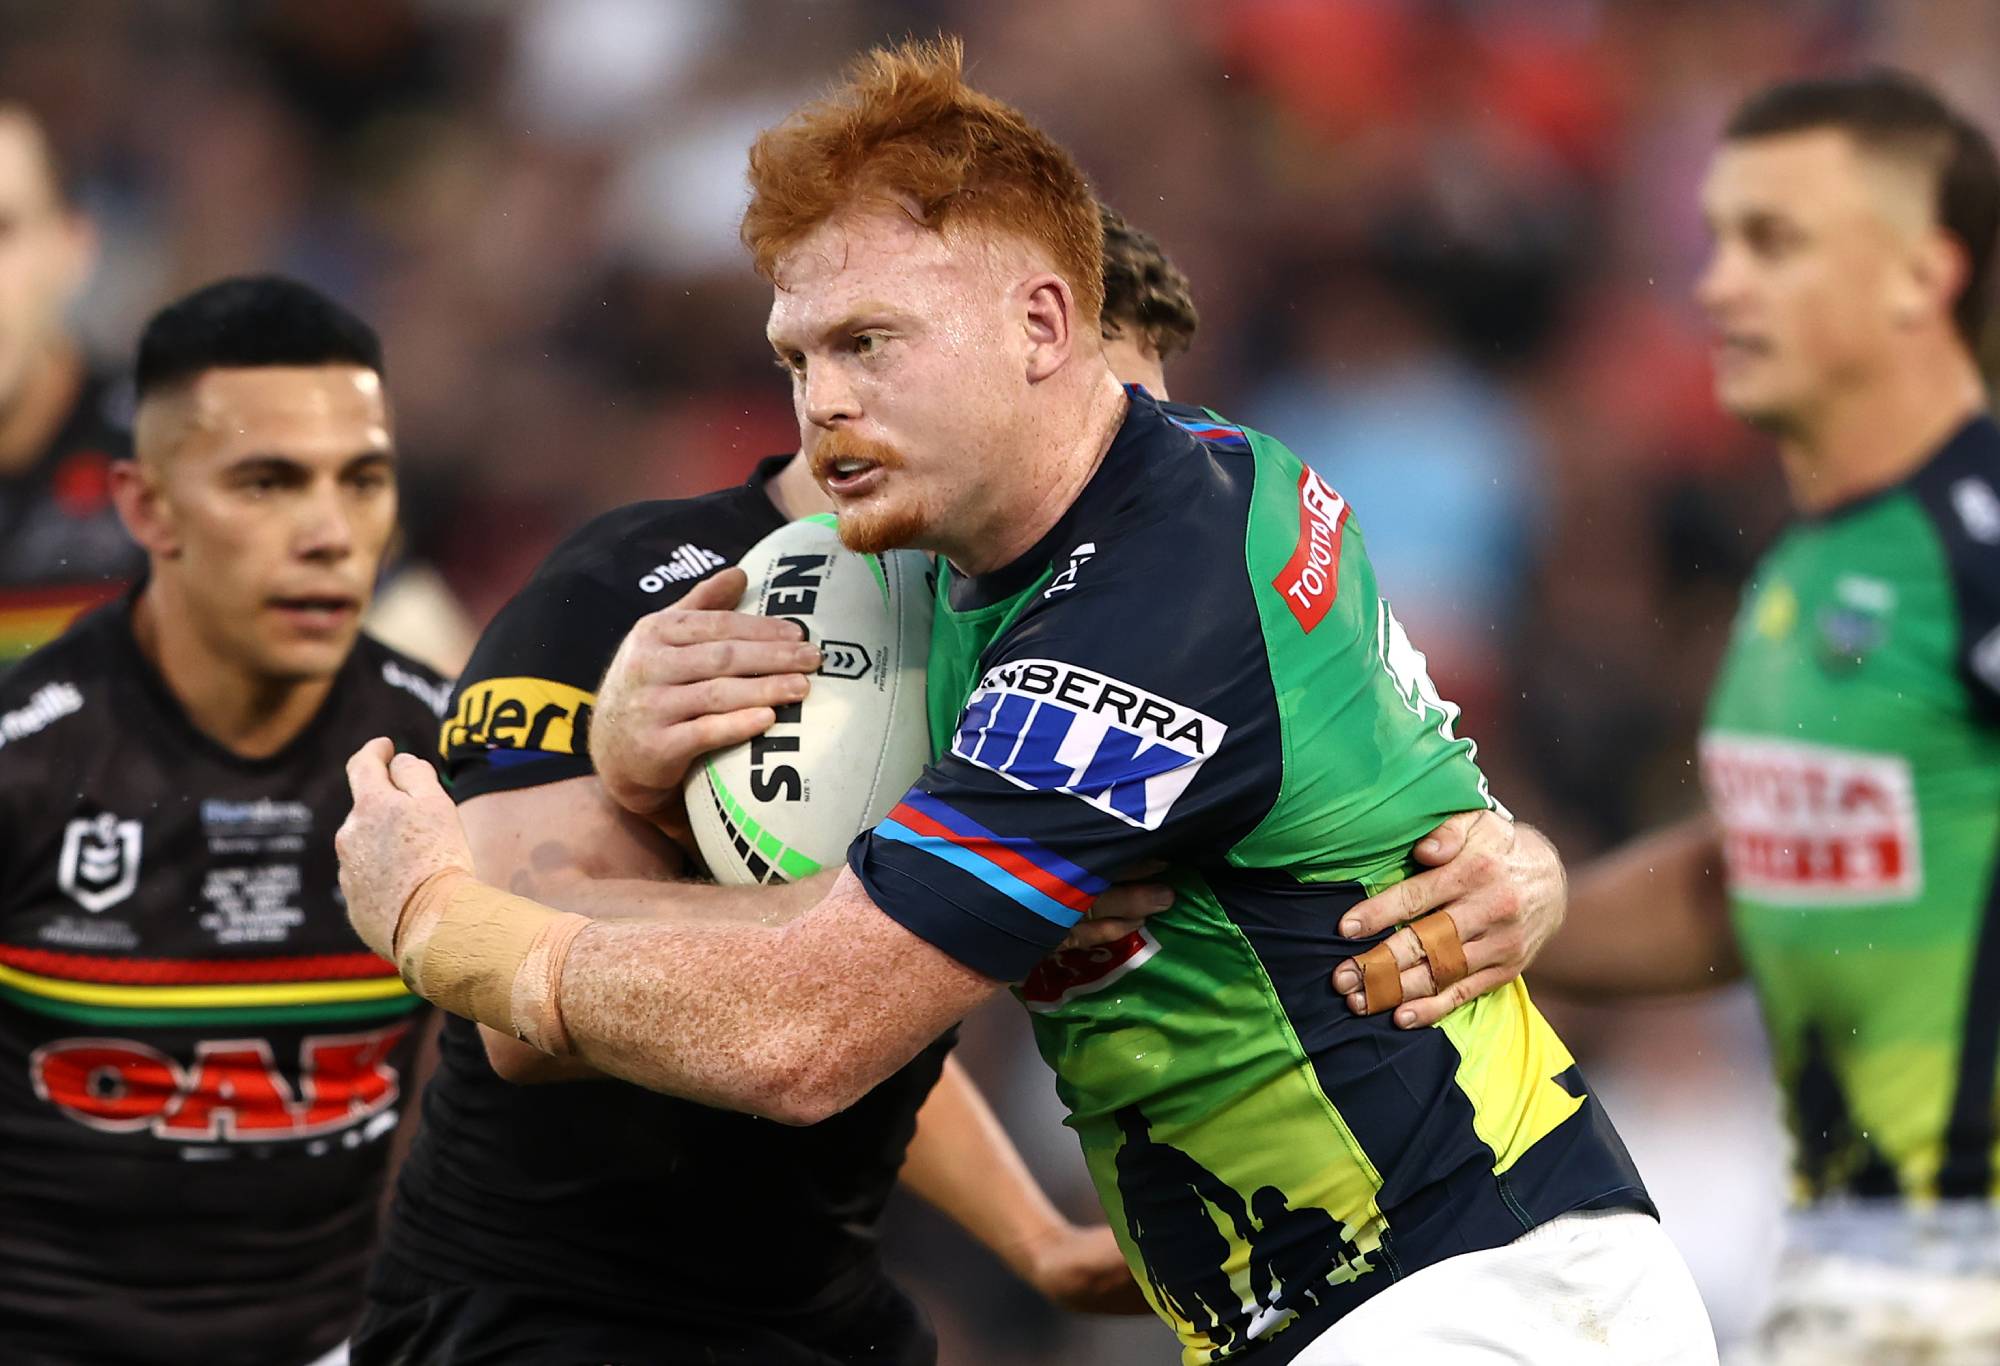 PENRITH, AUSTRALIA - APRIL 24: Corey Horsburgh of the Raiders is tackled during the round seven NRL match between the Penrith Panthers and the Canberra Raiders at BlueBet Stadium on April 24, 2022, in Penrith, Australia. (Photo by Matt Blyth/Getty Images)